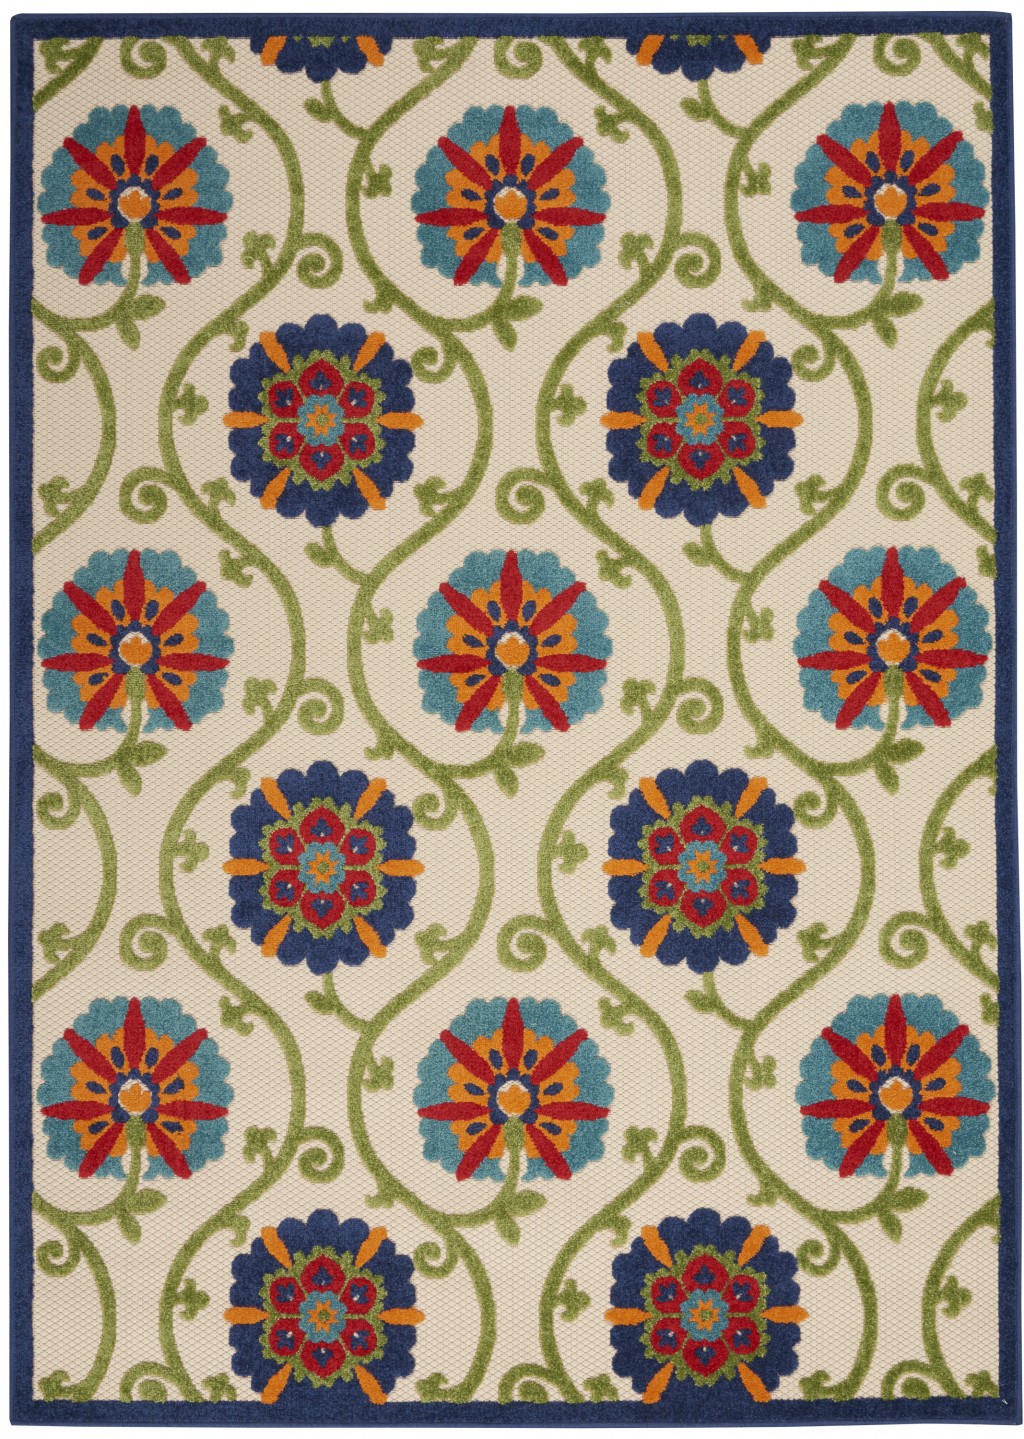 4' X 6' Ivory And Blue Floral Indoor Outdoor Area Rug-384971-1